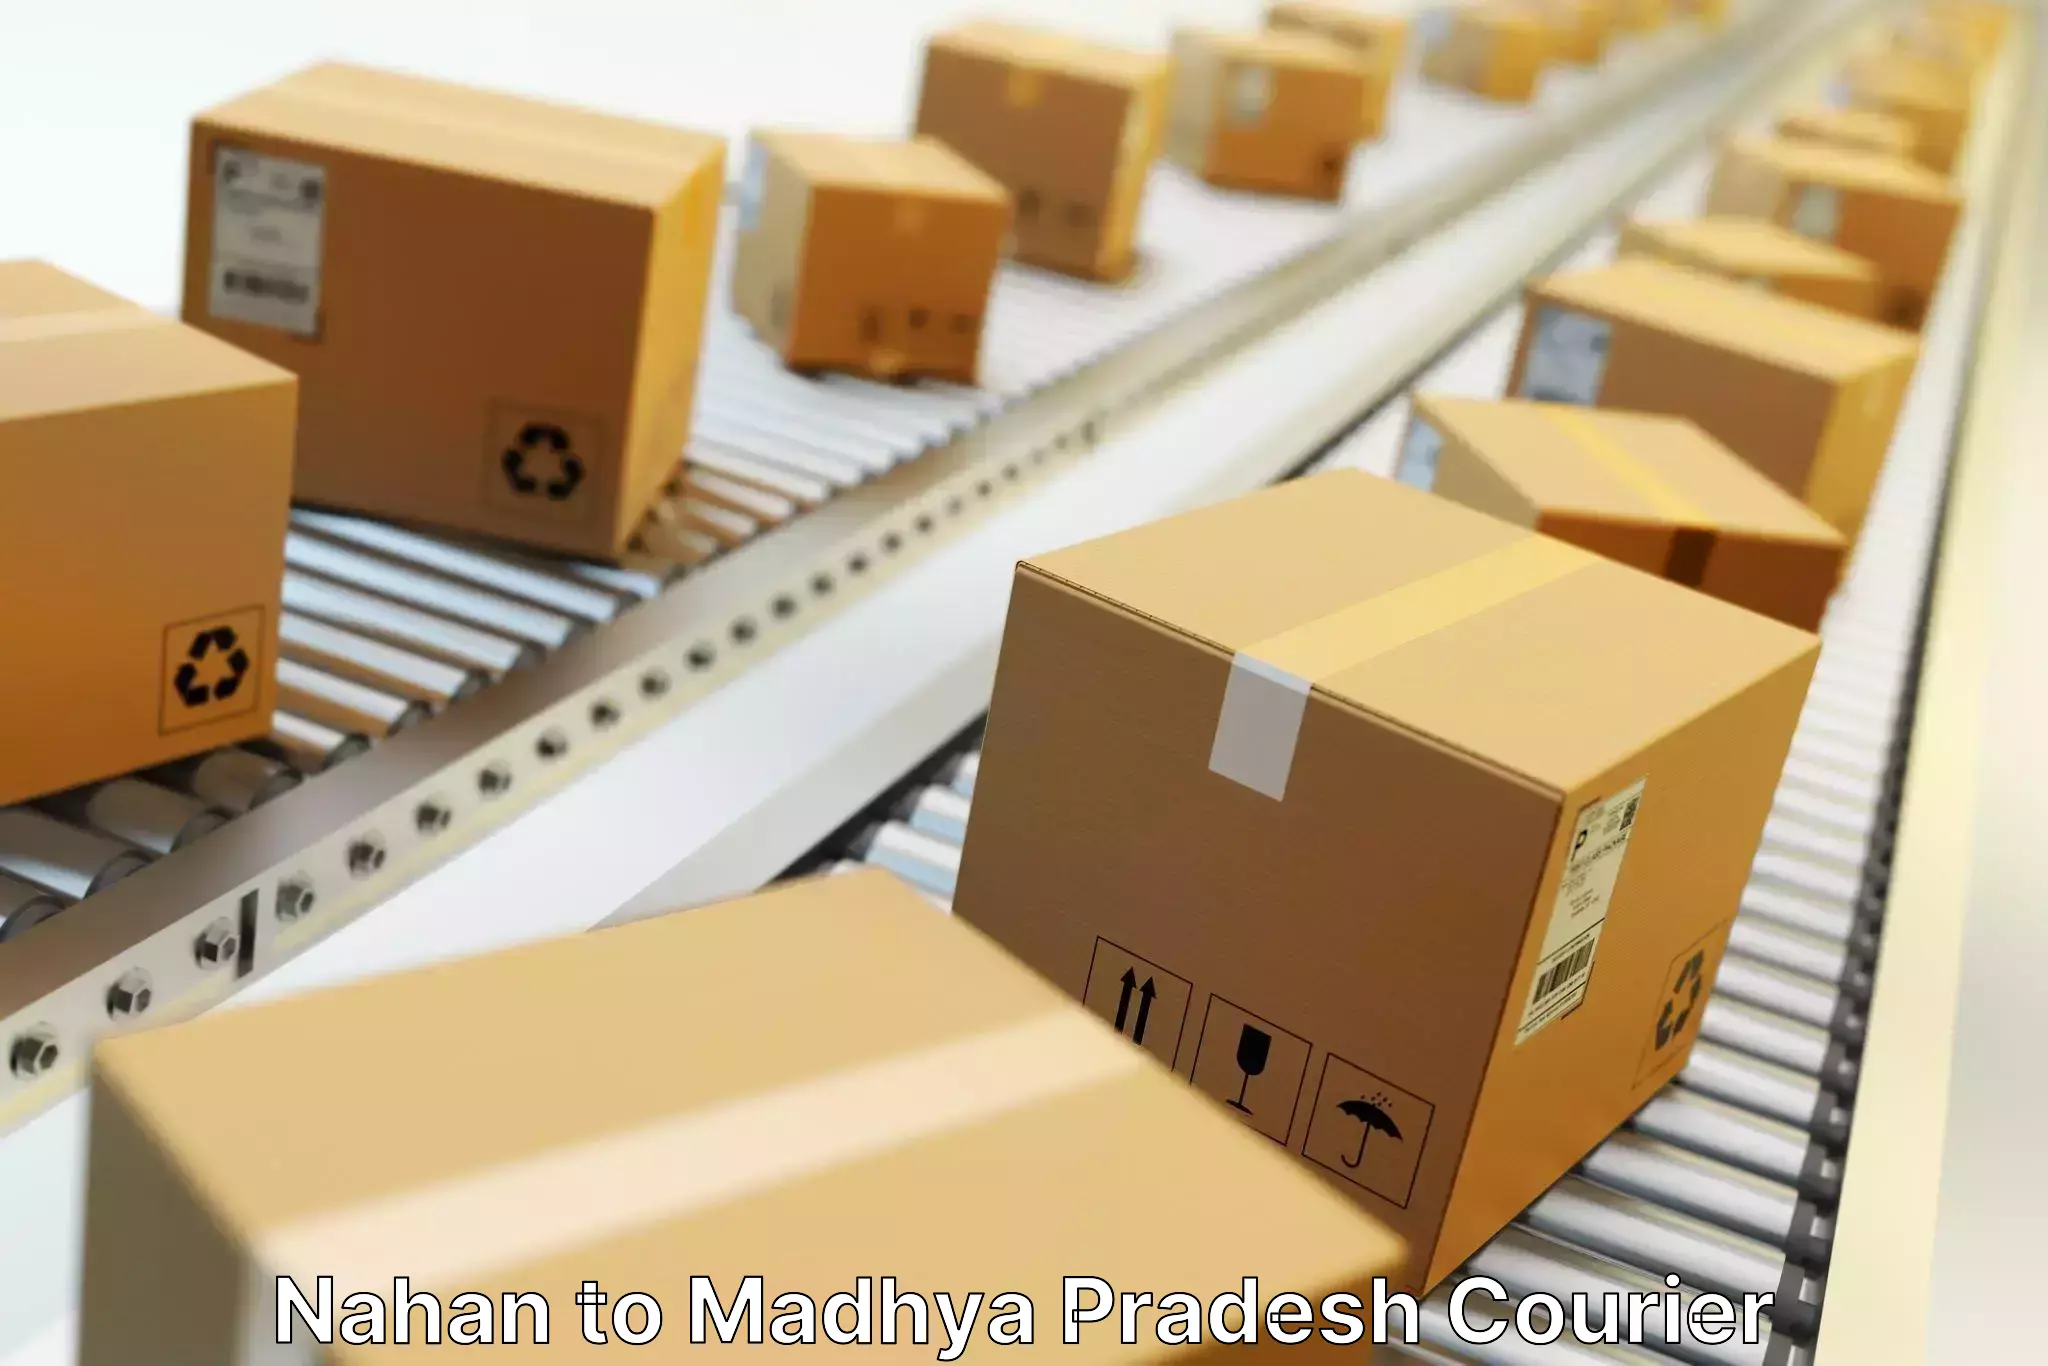 Efficient order fulfillment Nahan to Madwas